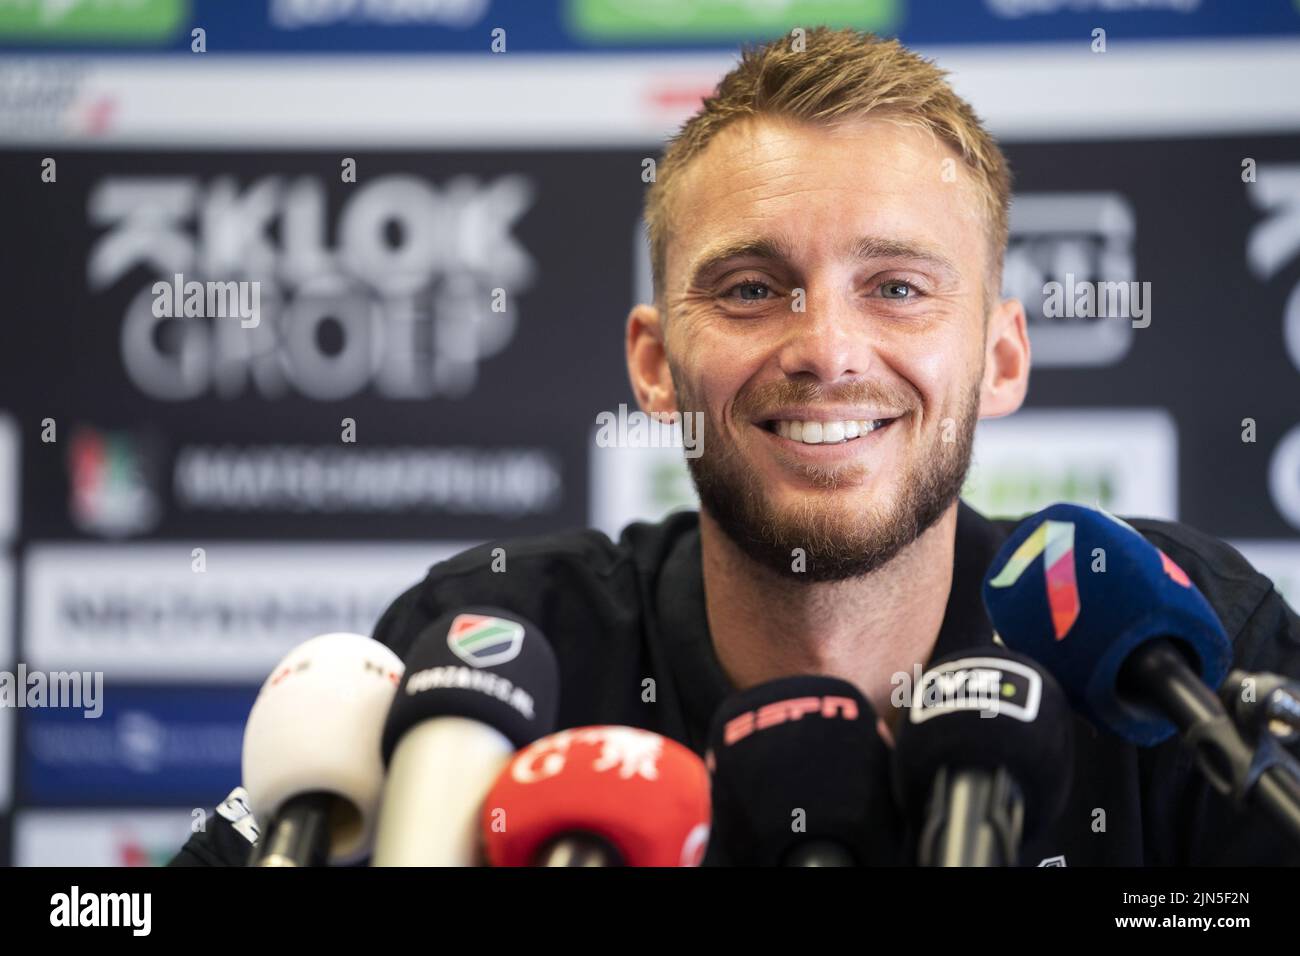 2022-08-09 10:58:12 NIJMEGEN - Jasper Cillessen during his presentation at NEC. The 33-year-old goalkeeper has committed himself to the club from Nijmegen for three years. He left the Gelderland formation for Ajax in 2011 and later also played for FC Barcelona and Valencia. ANP JEROEN JUMELET netherlands out - belgium out Stock Photo